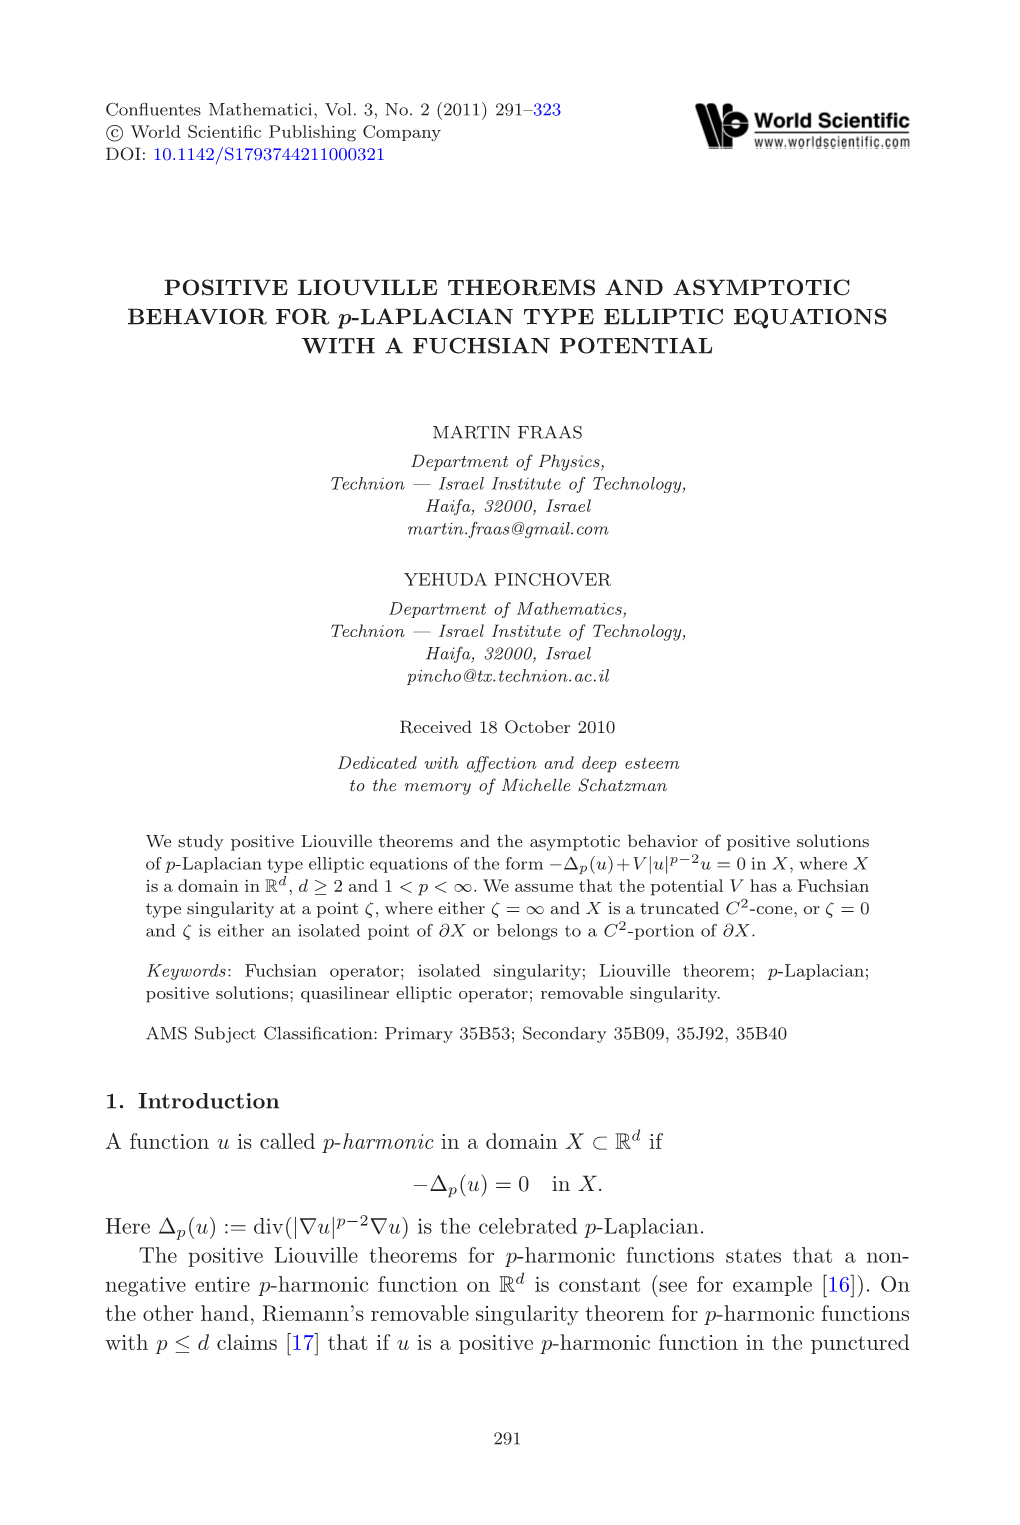 POSITIVE LIOUVILLE THEOREMS and ASYMPTOTIC BEHAVIOR for P-LAPLACIAN TYPE ELLIPTIC EQUATIONS with a FUCHSIAN POTENTIAL